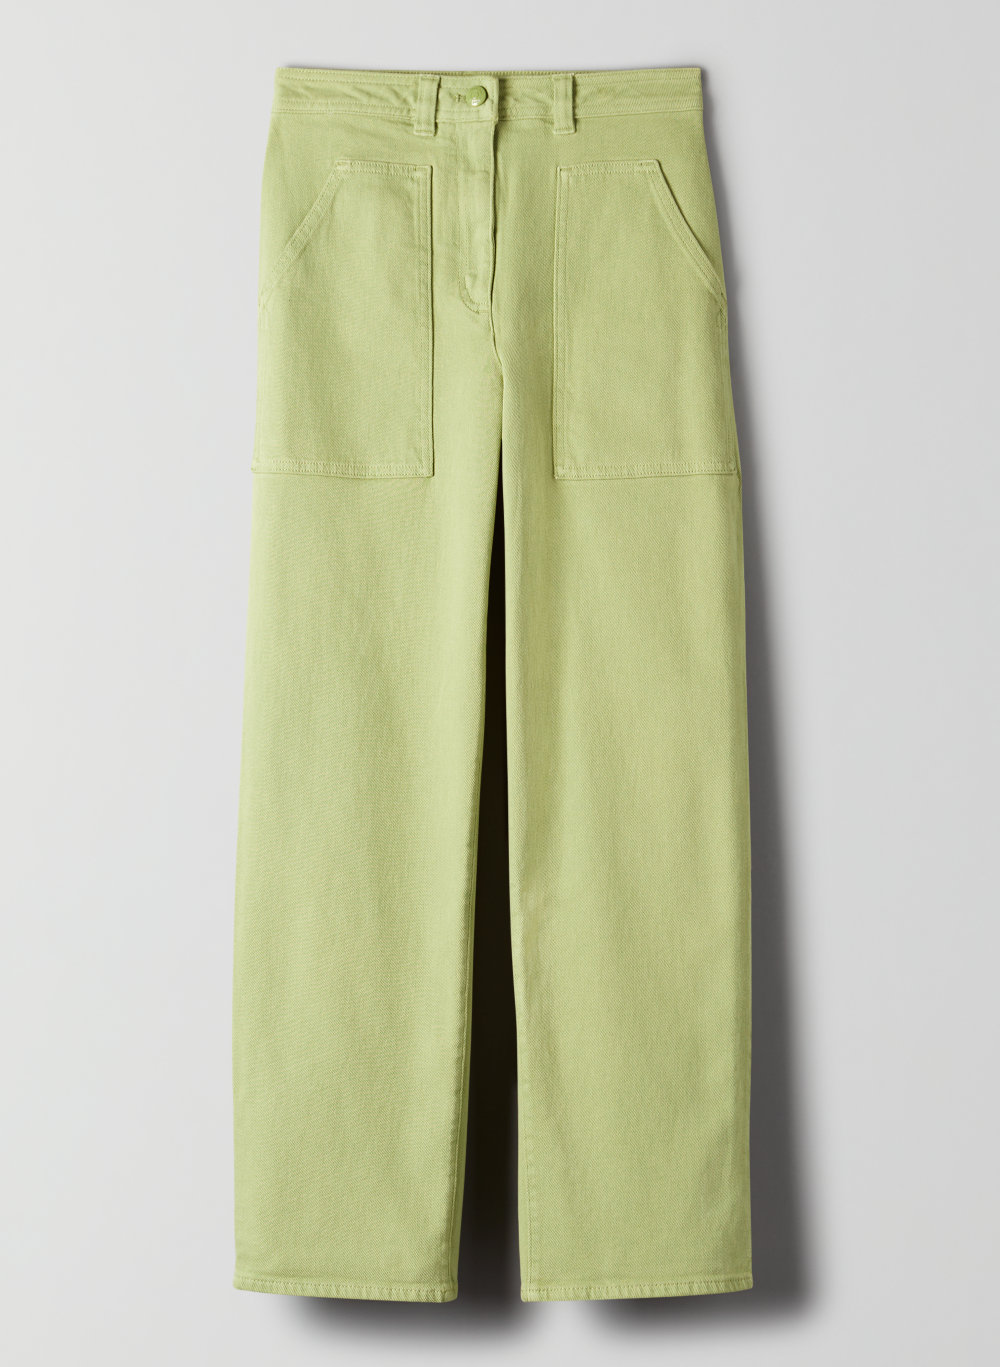 Wilfred Free RYLEY PANT | Aritzia US